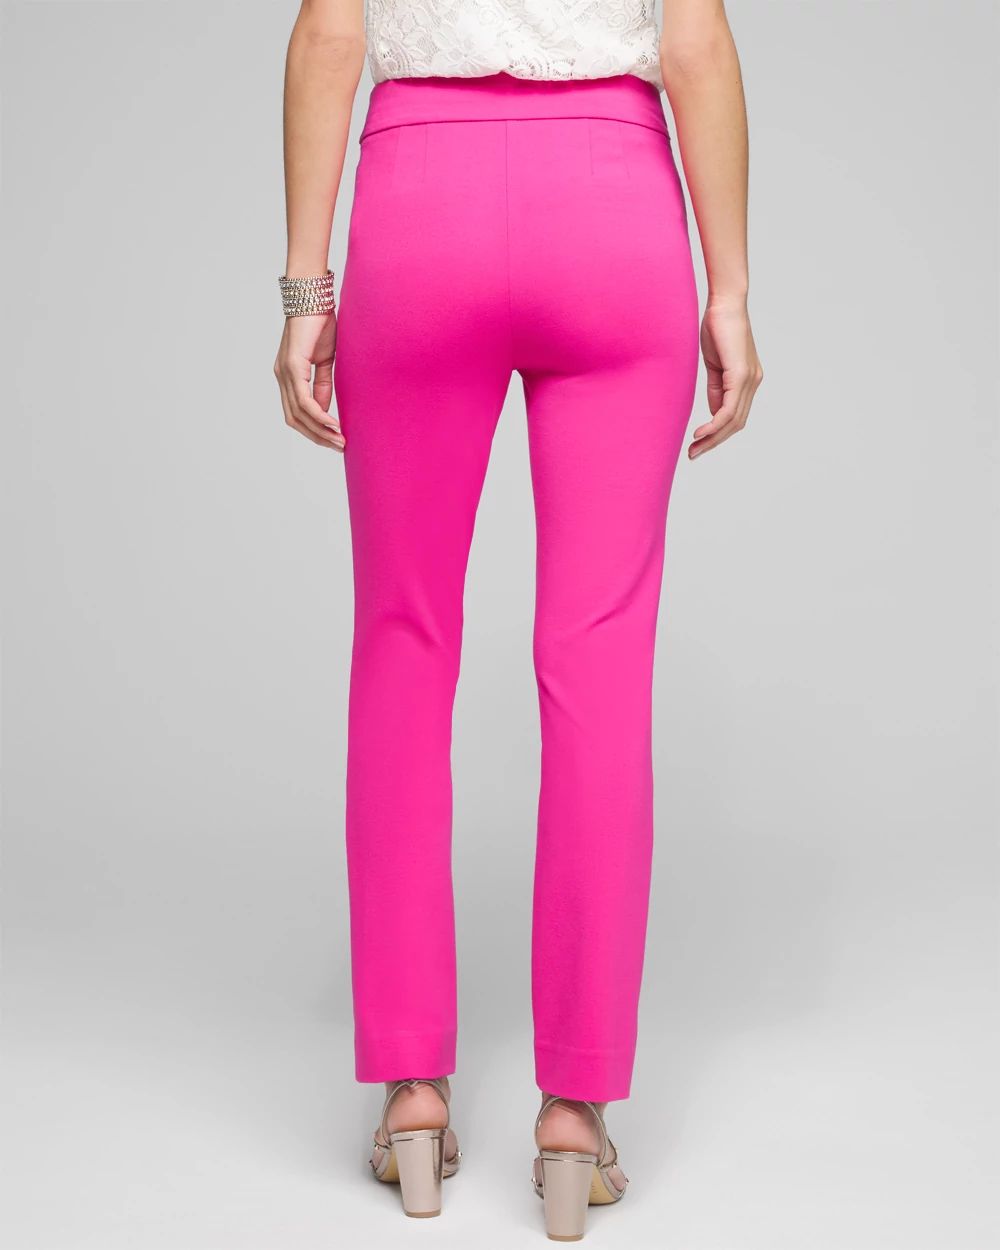 Outlet WHBM Straight Leg Pant